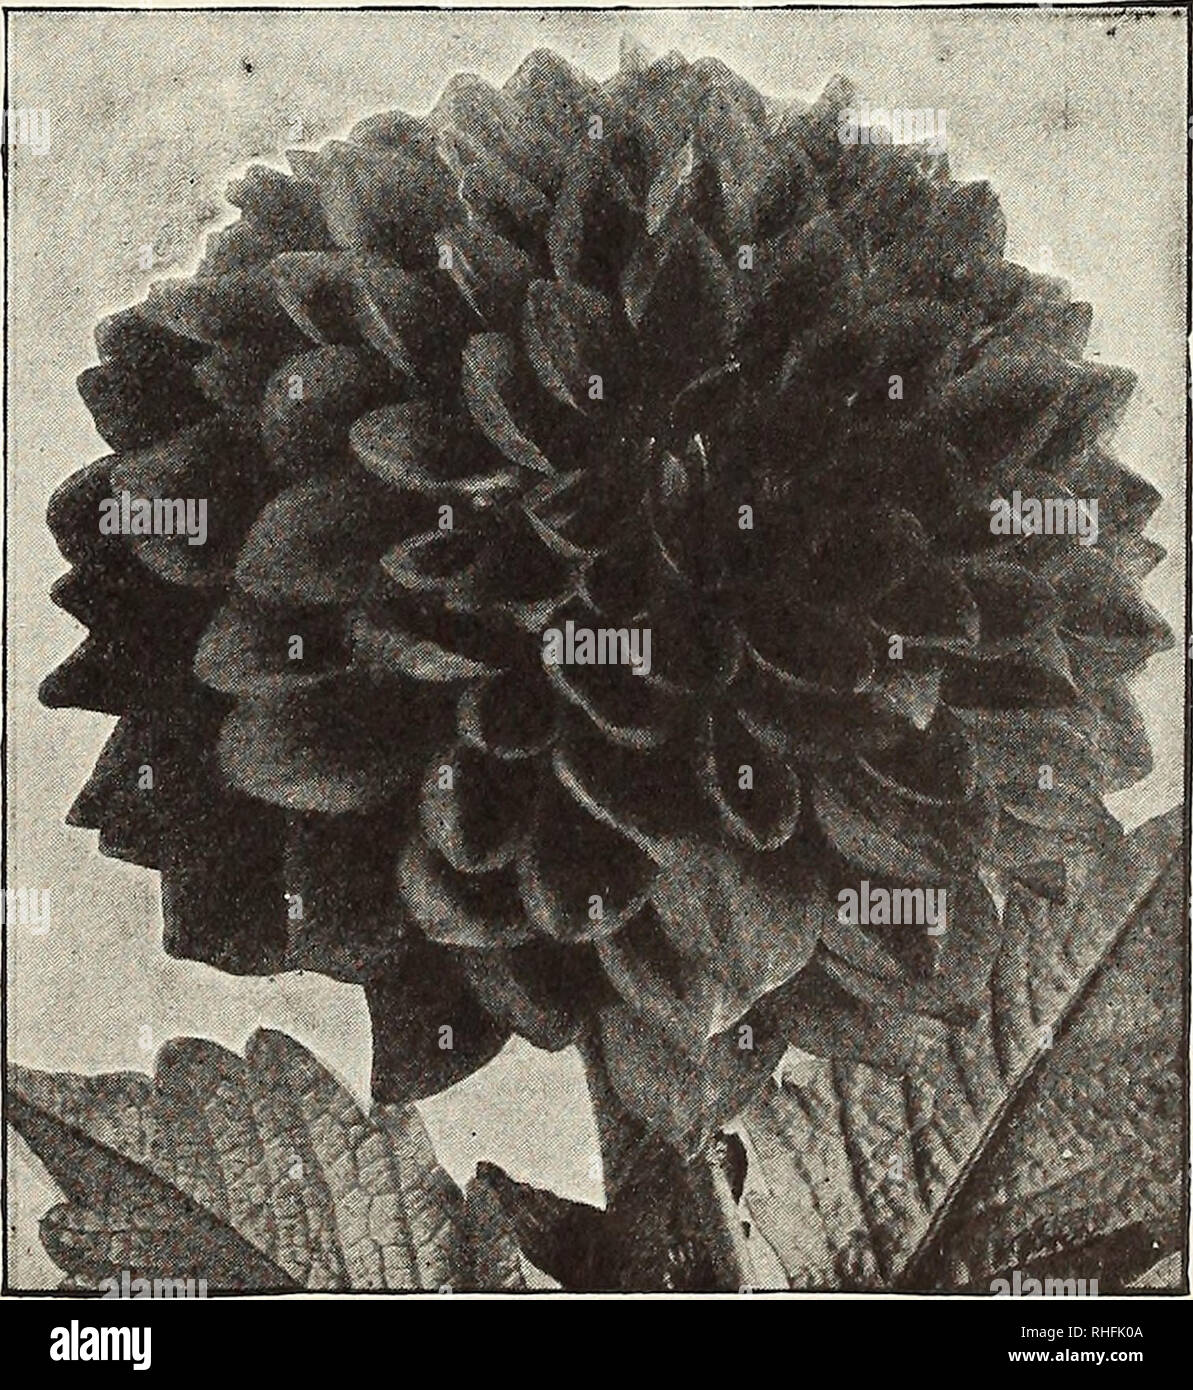 . Bolgiano of Baltimore garden guide 1929. Seeds Maryland Baltimore Catalogs; Vegetables Maryland Baltimore Catalogs; Nurseries (Horticulture) Maryland Baltimore Catalogs; Flowers Seeds Catalogs; Gardening Equipment and supplies Catalogs. CACTUS DAHLIAS Attraction. Large, elegant flower of a clear lilac-rose, on long, stiff stems. 50 cts. each. Cigarette. Creamy white blooms, heavily edged with pome- granate-red but varying greatly, no two flowers being exactly alike. The long petals are inclined to roll, forming large, deep flowers of great substance on very long stems. $1 each. Countess of L Stock Photo